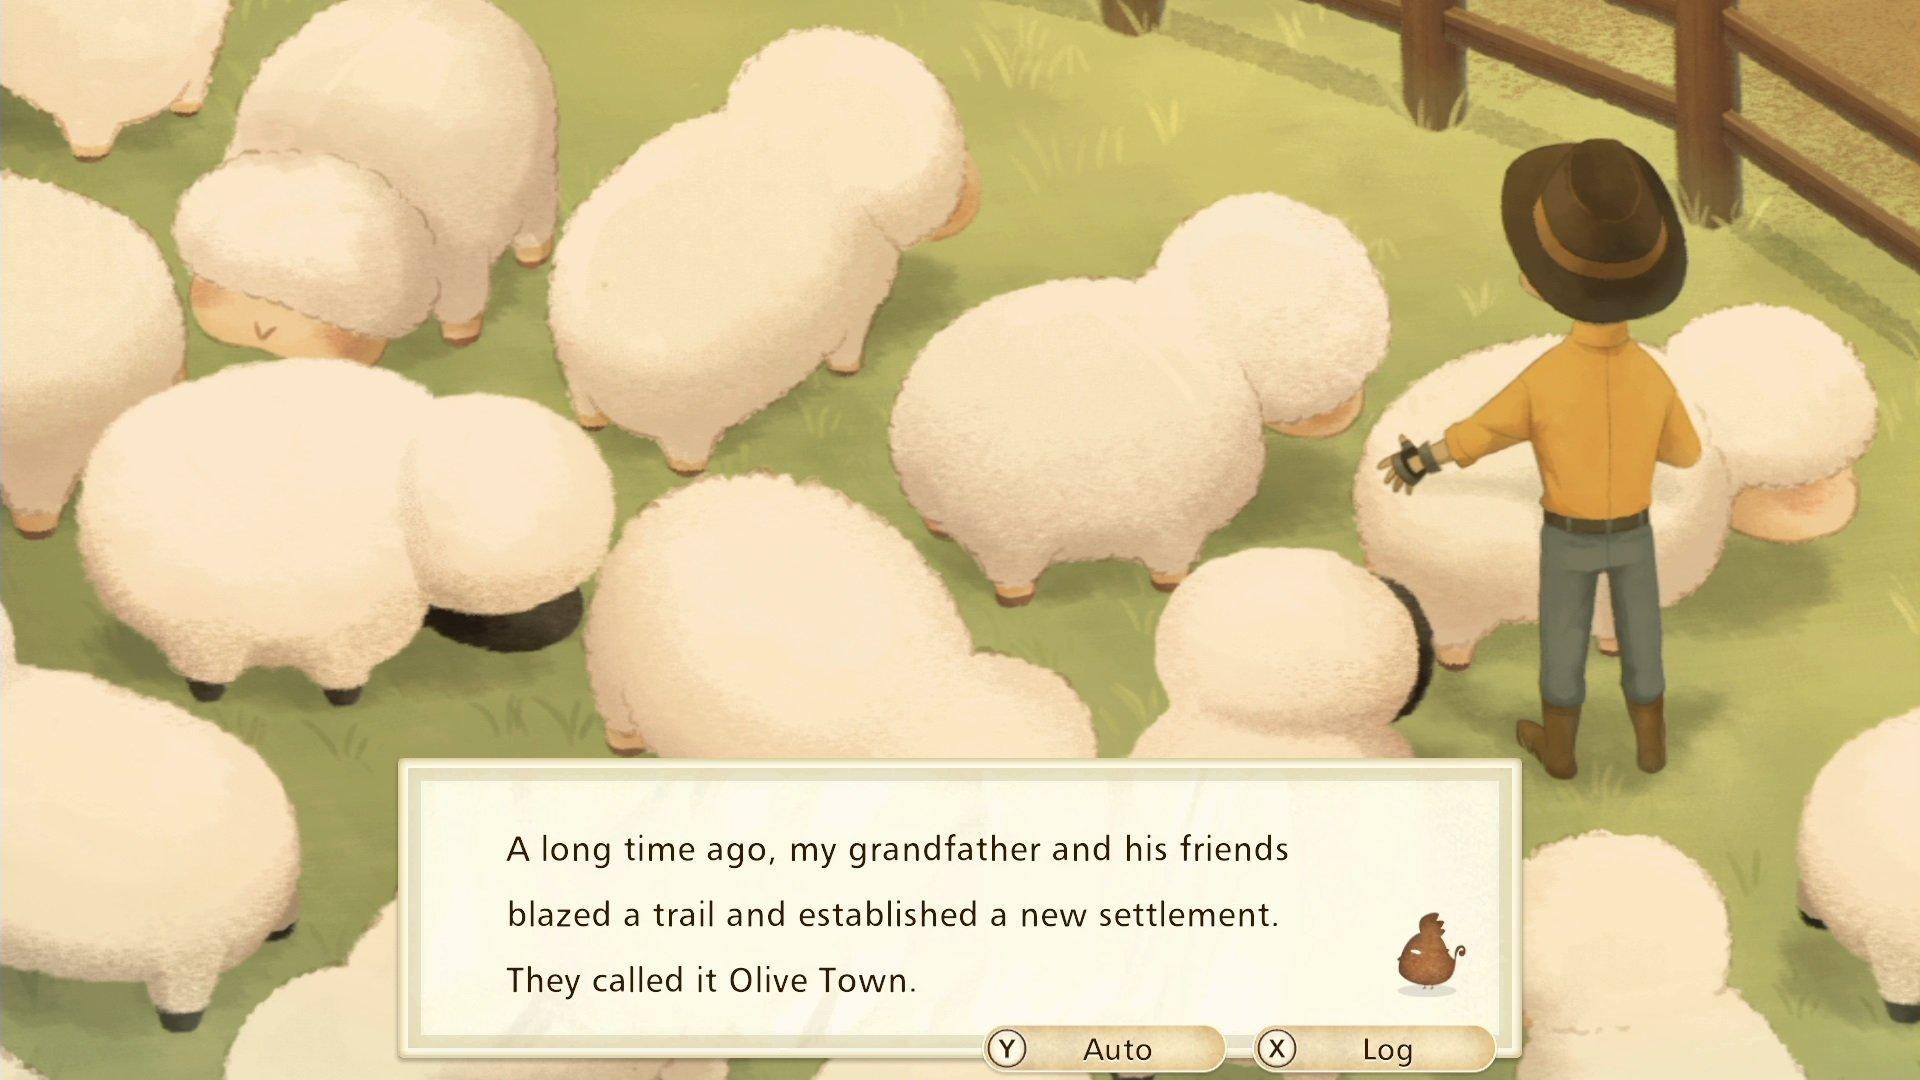 Story of Seasons: Pioneers of Olive Town - Nintendo Switch